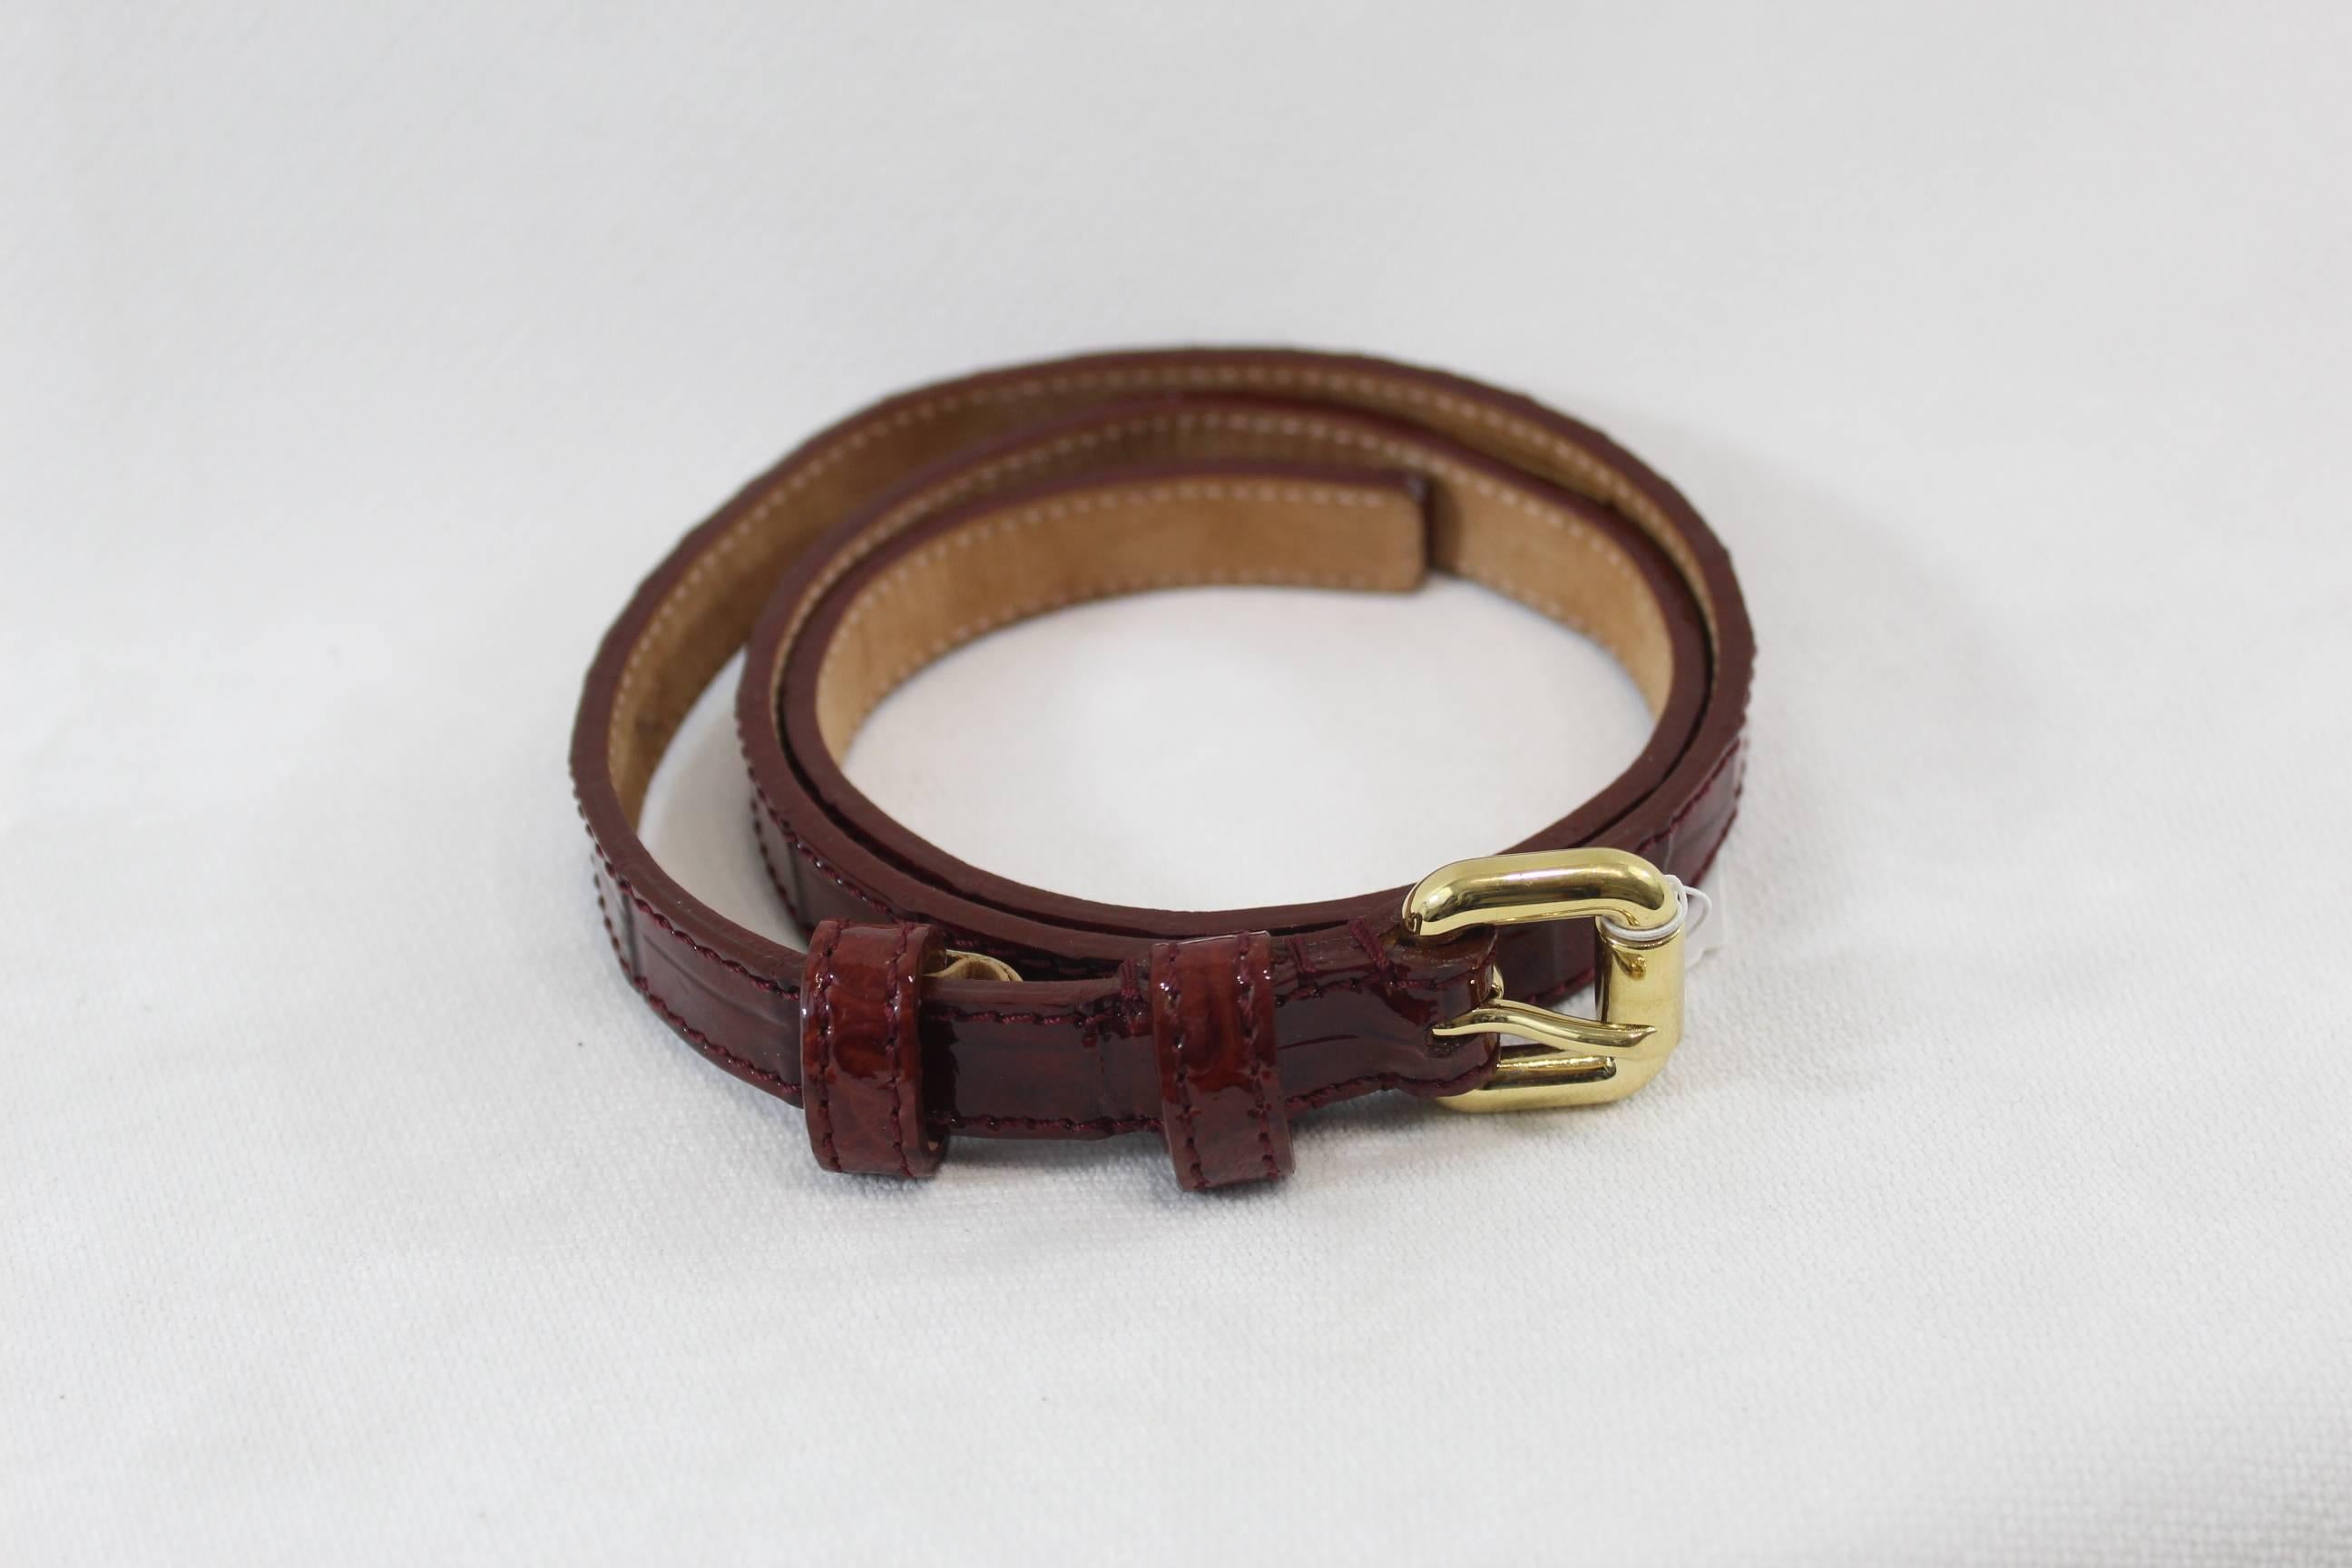 Really nice Louis Vuitton belt in bordeaux patented leather and gold hardware.

Godd condition but some minor sign of wear.

Total lenght 82 cm